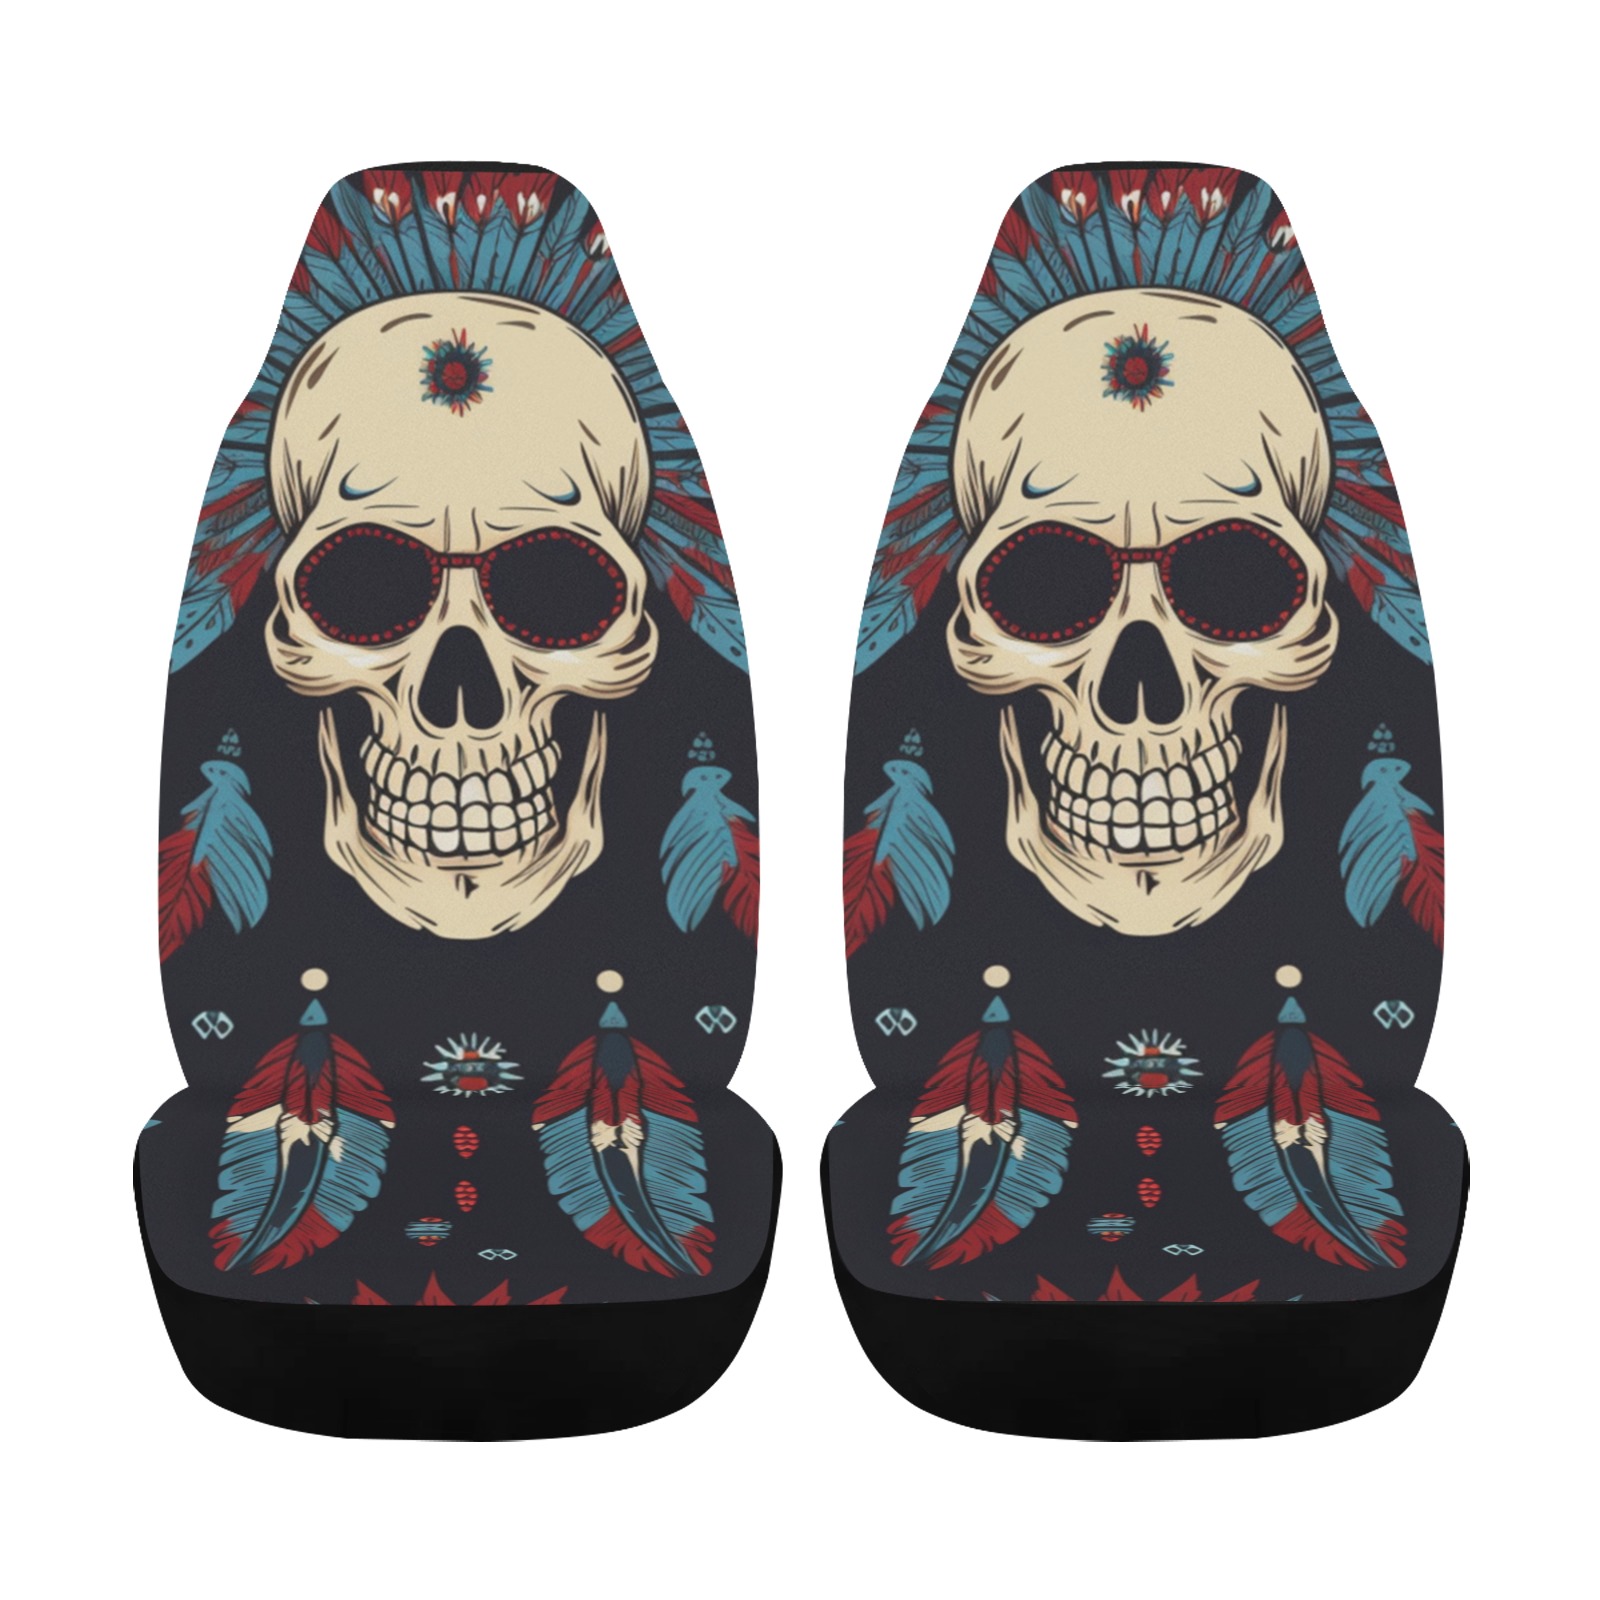 Native American Skull Car Seat Cover Airbag Compatible (Set of 2)